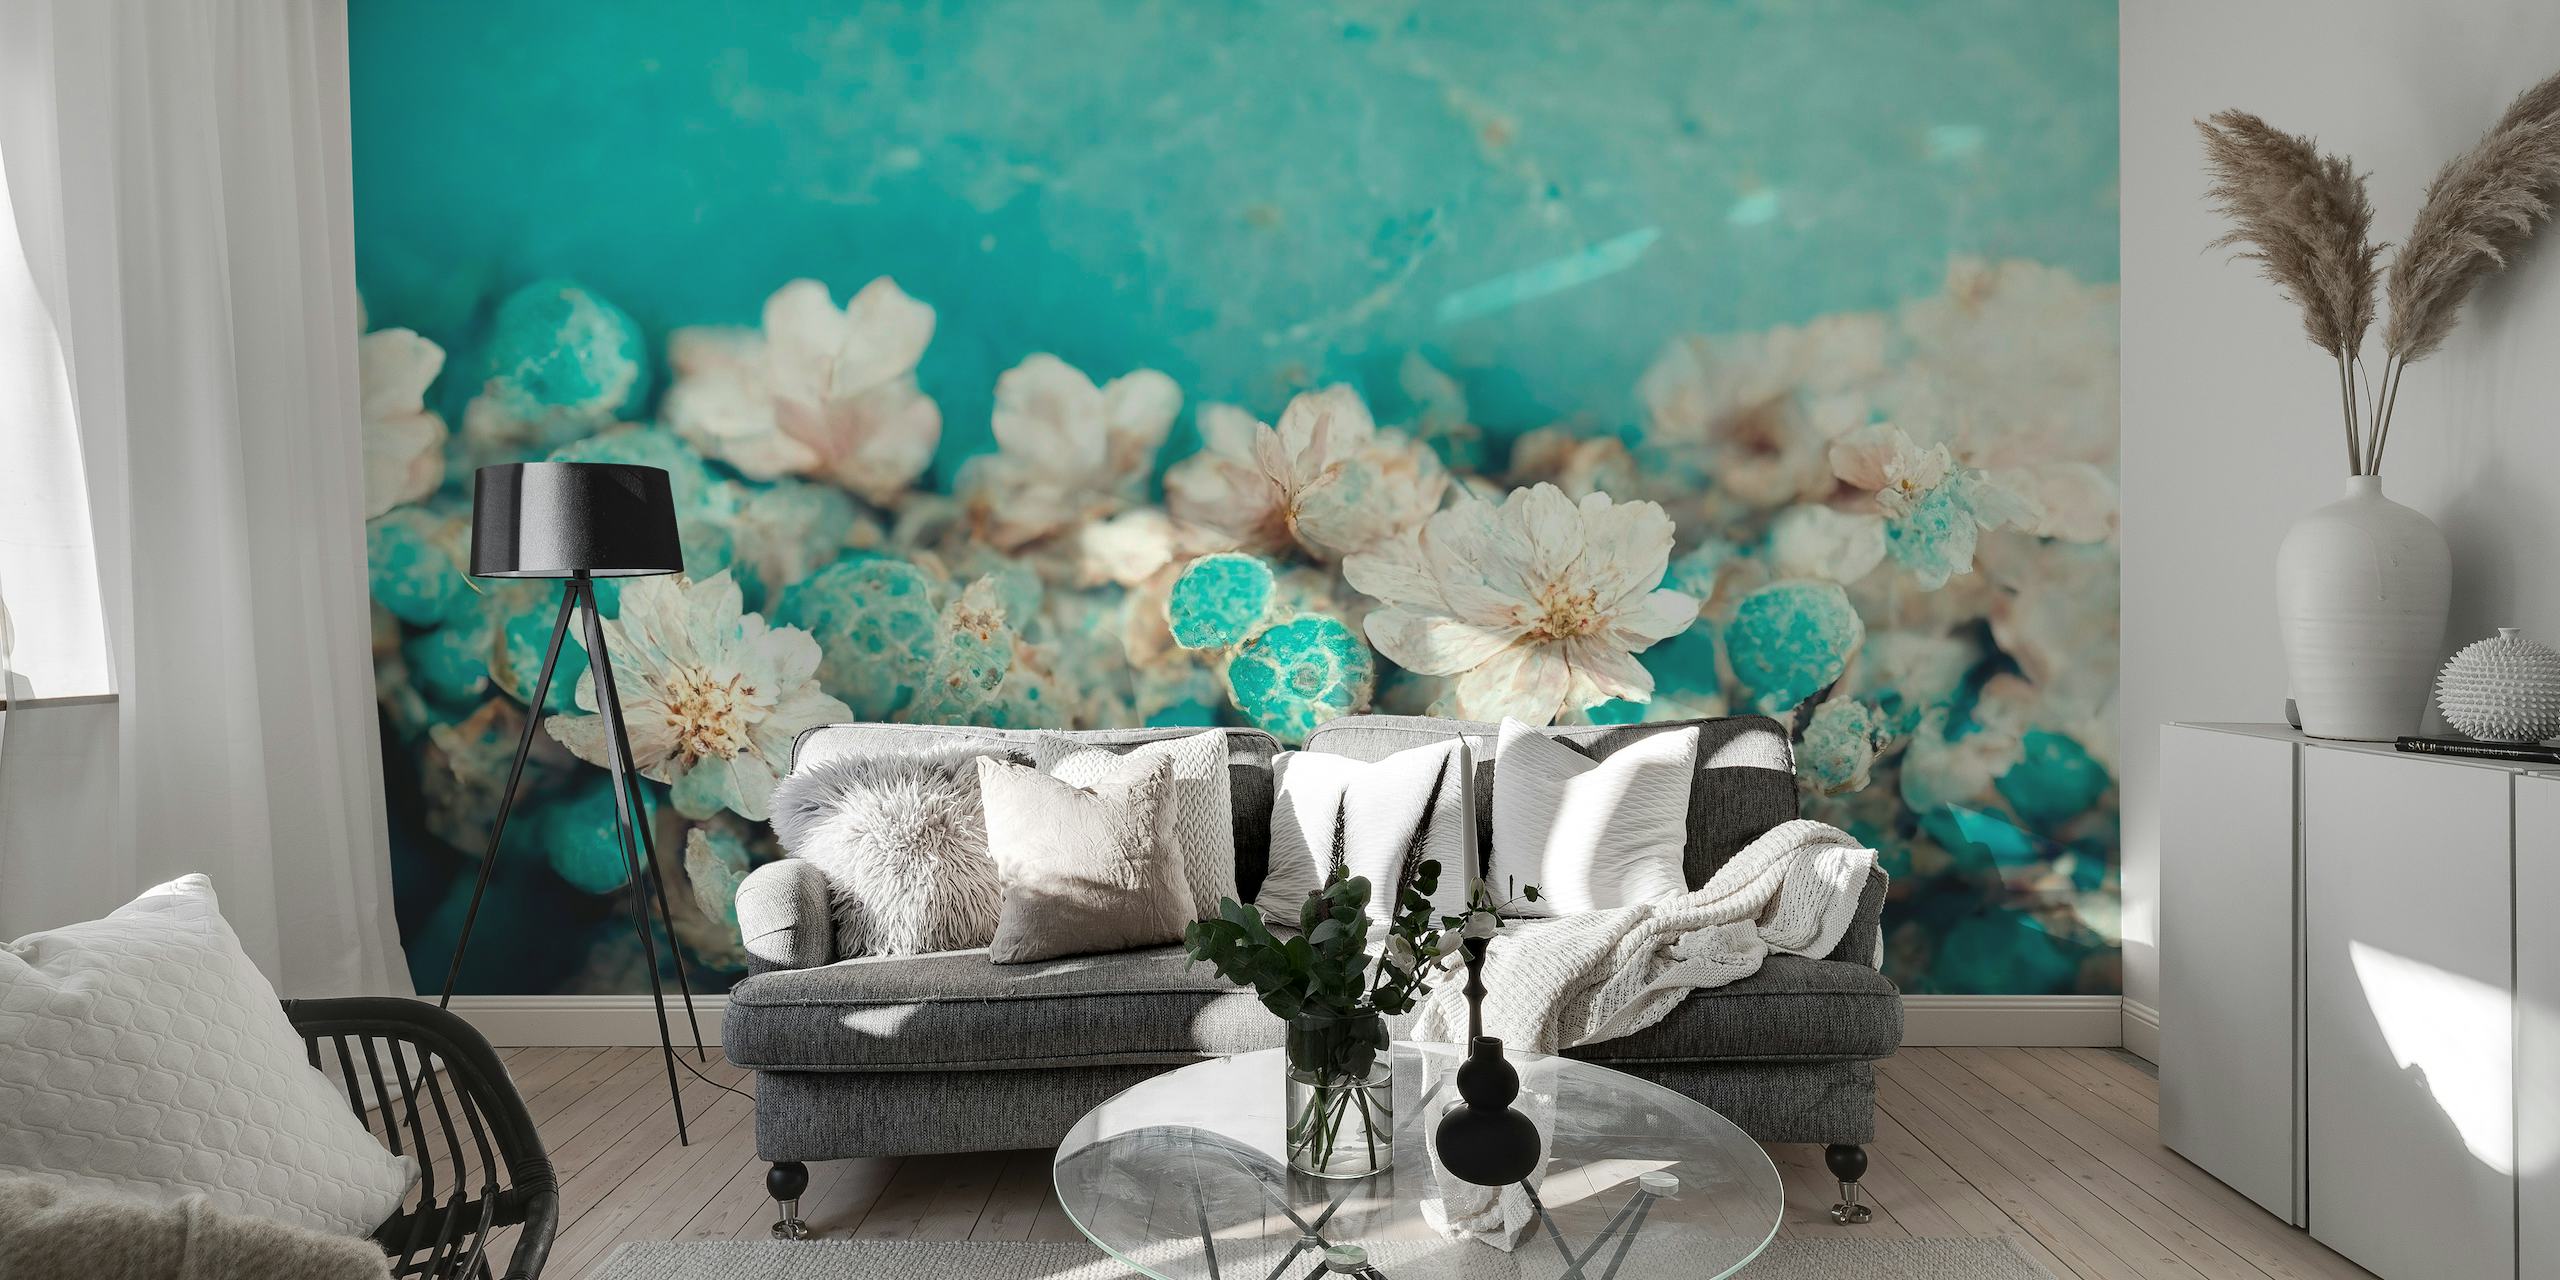 Close-up of white flowers against a turquoise background wall mural